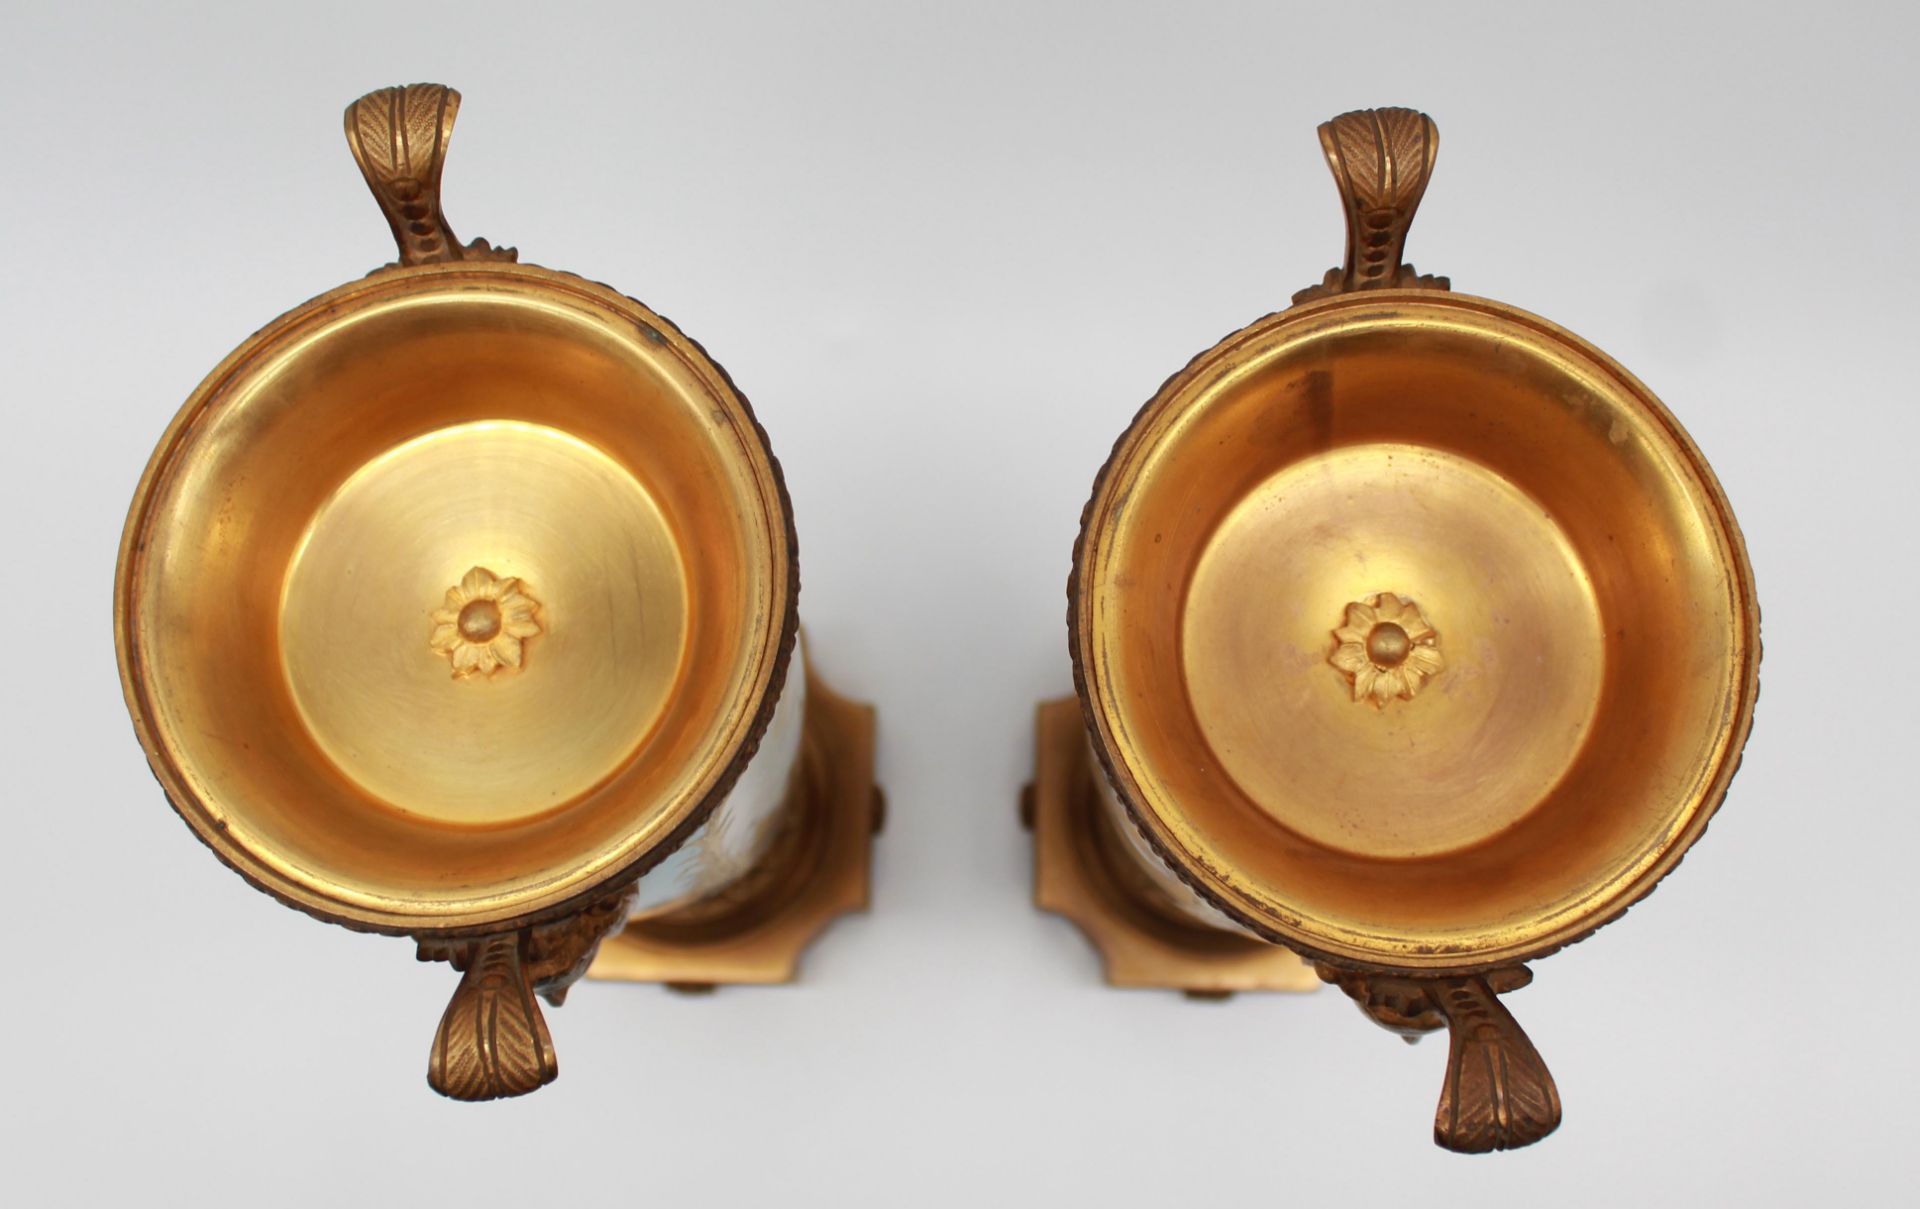 Two lidded cups around 1900. Porcelain. With "bronze dore" mounts. - Image 9 of 12